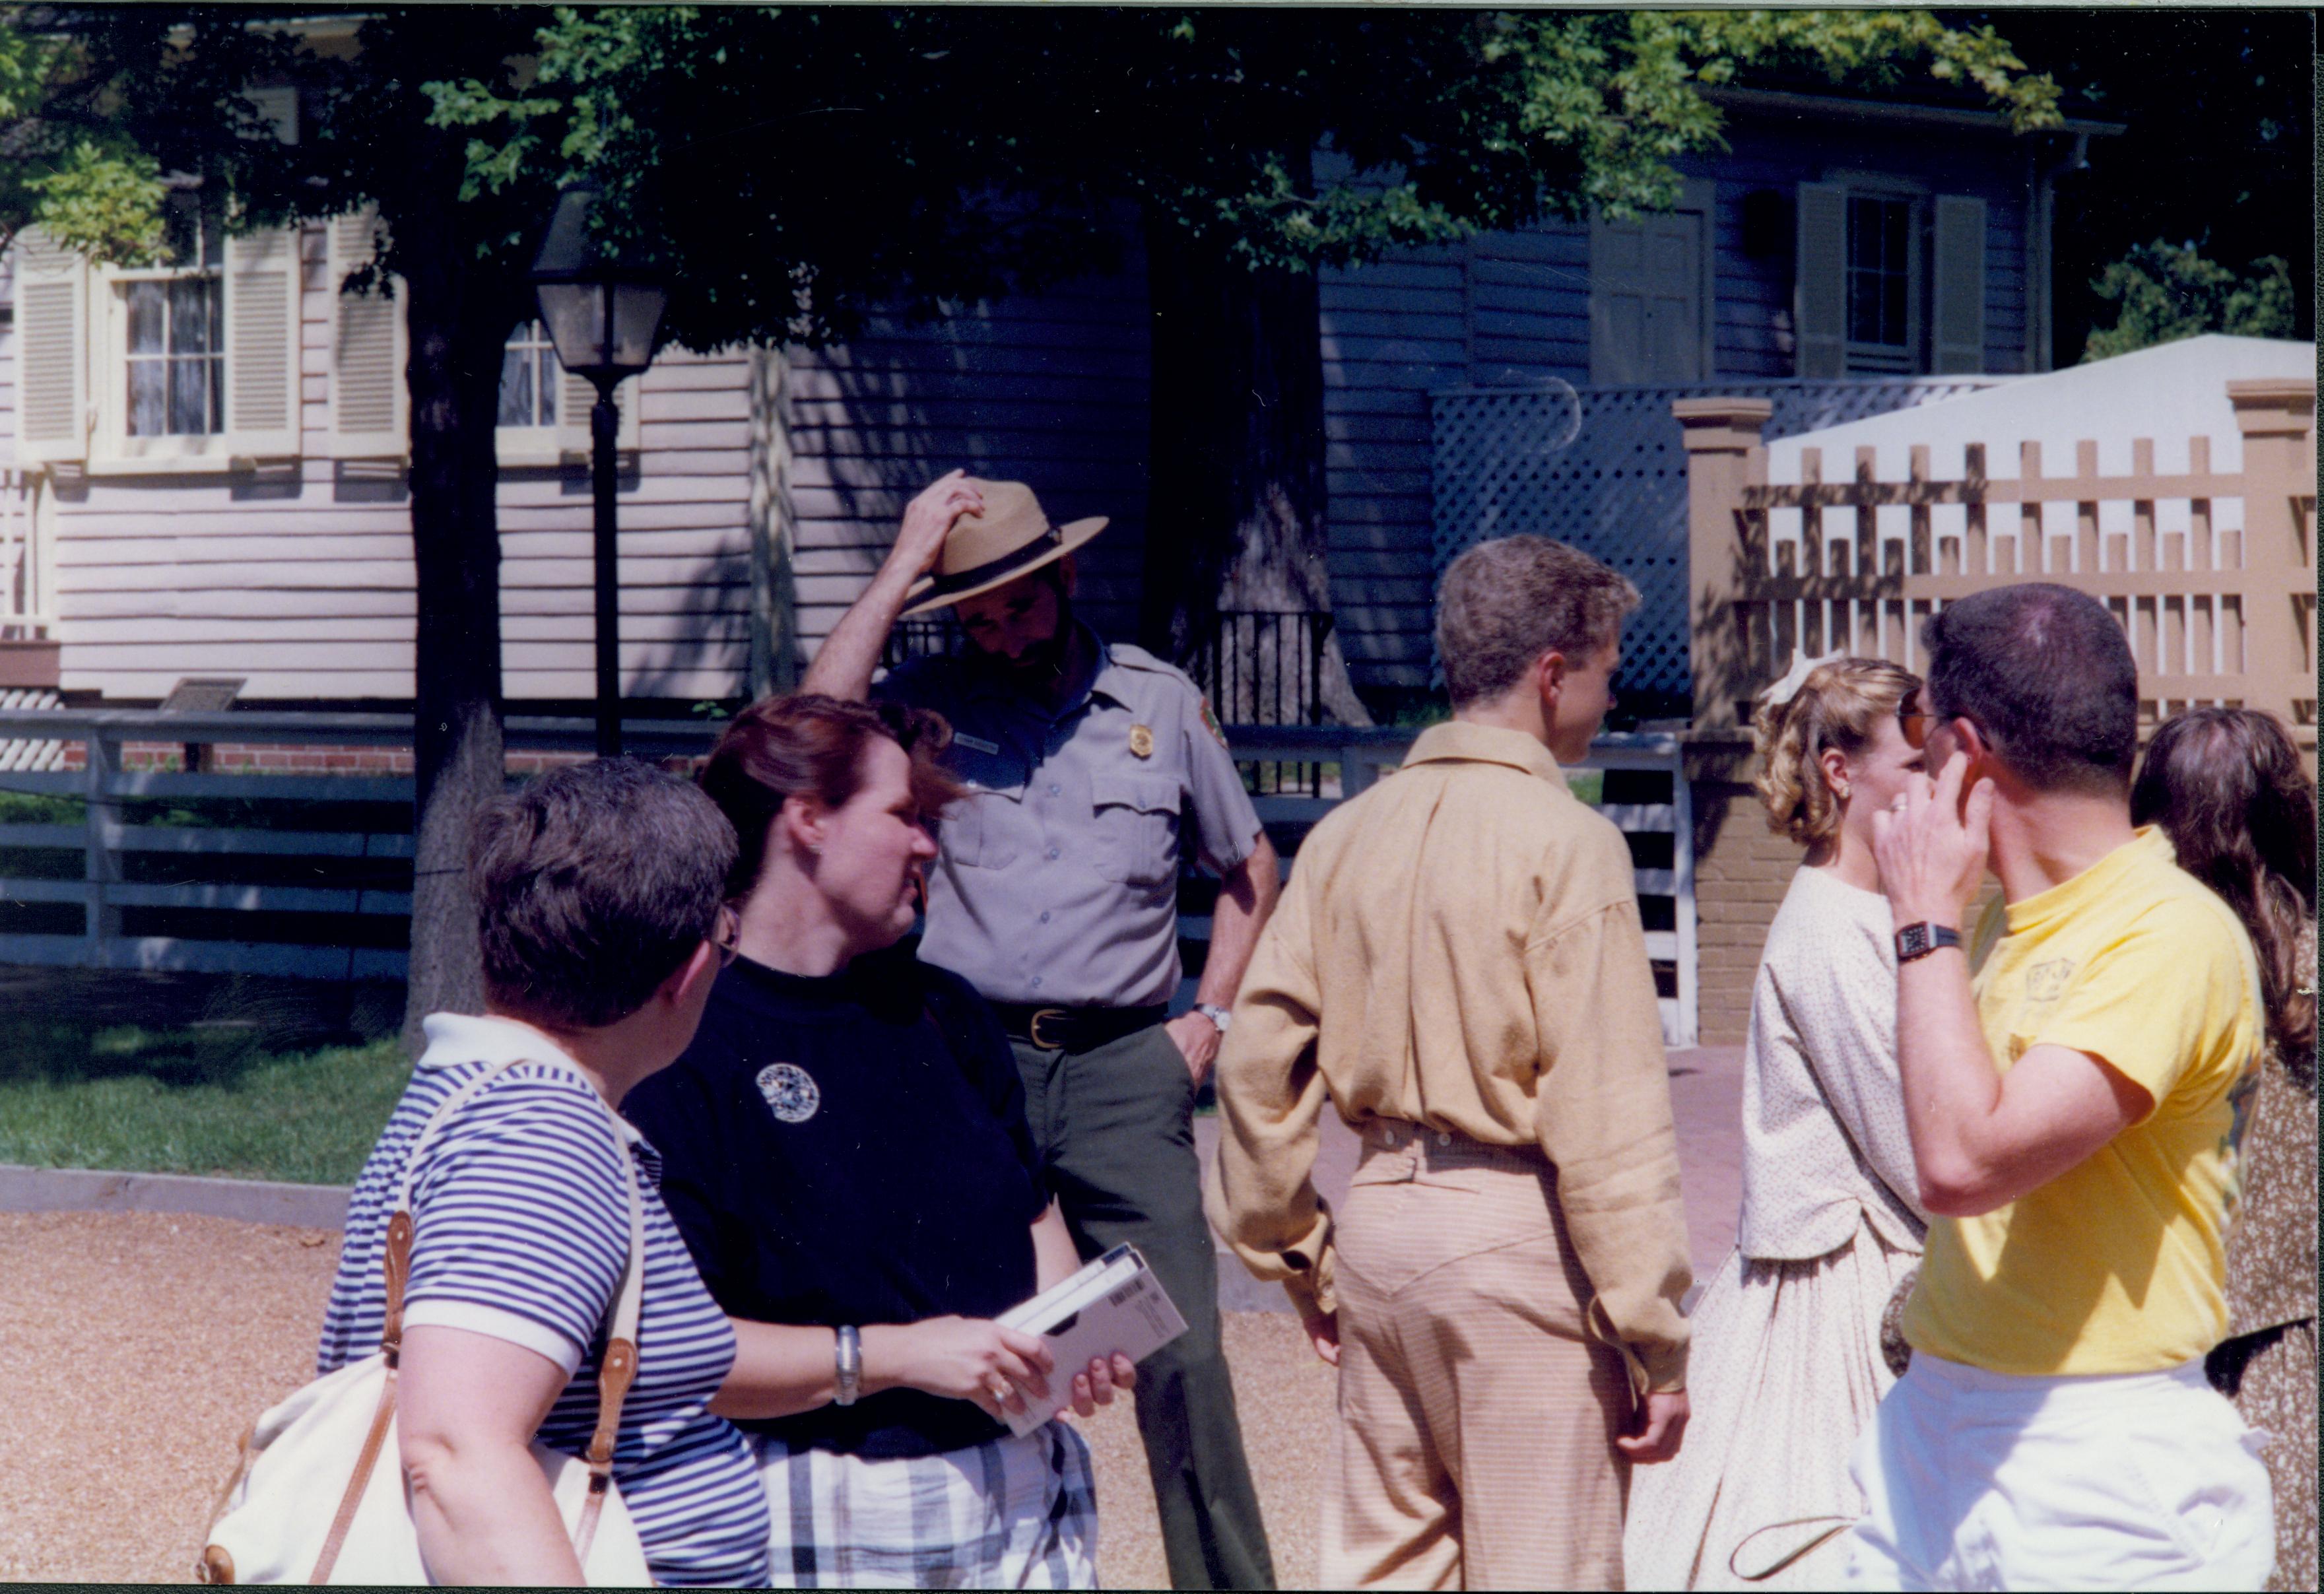 Greg Forbes, Jennie McClain , Rebecca Mdale, Ranger Rich Eggleston, Greg Forbes with students preparations for slide show project Looking Northeast in front of Lincoln Home, near Corneau House staff, students, Corneau, Lincoln Home